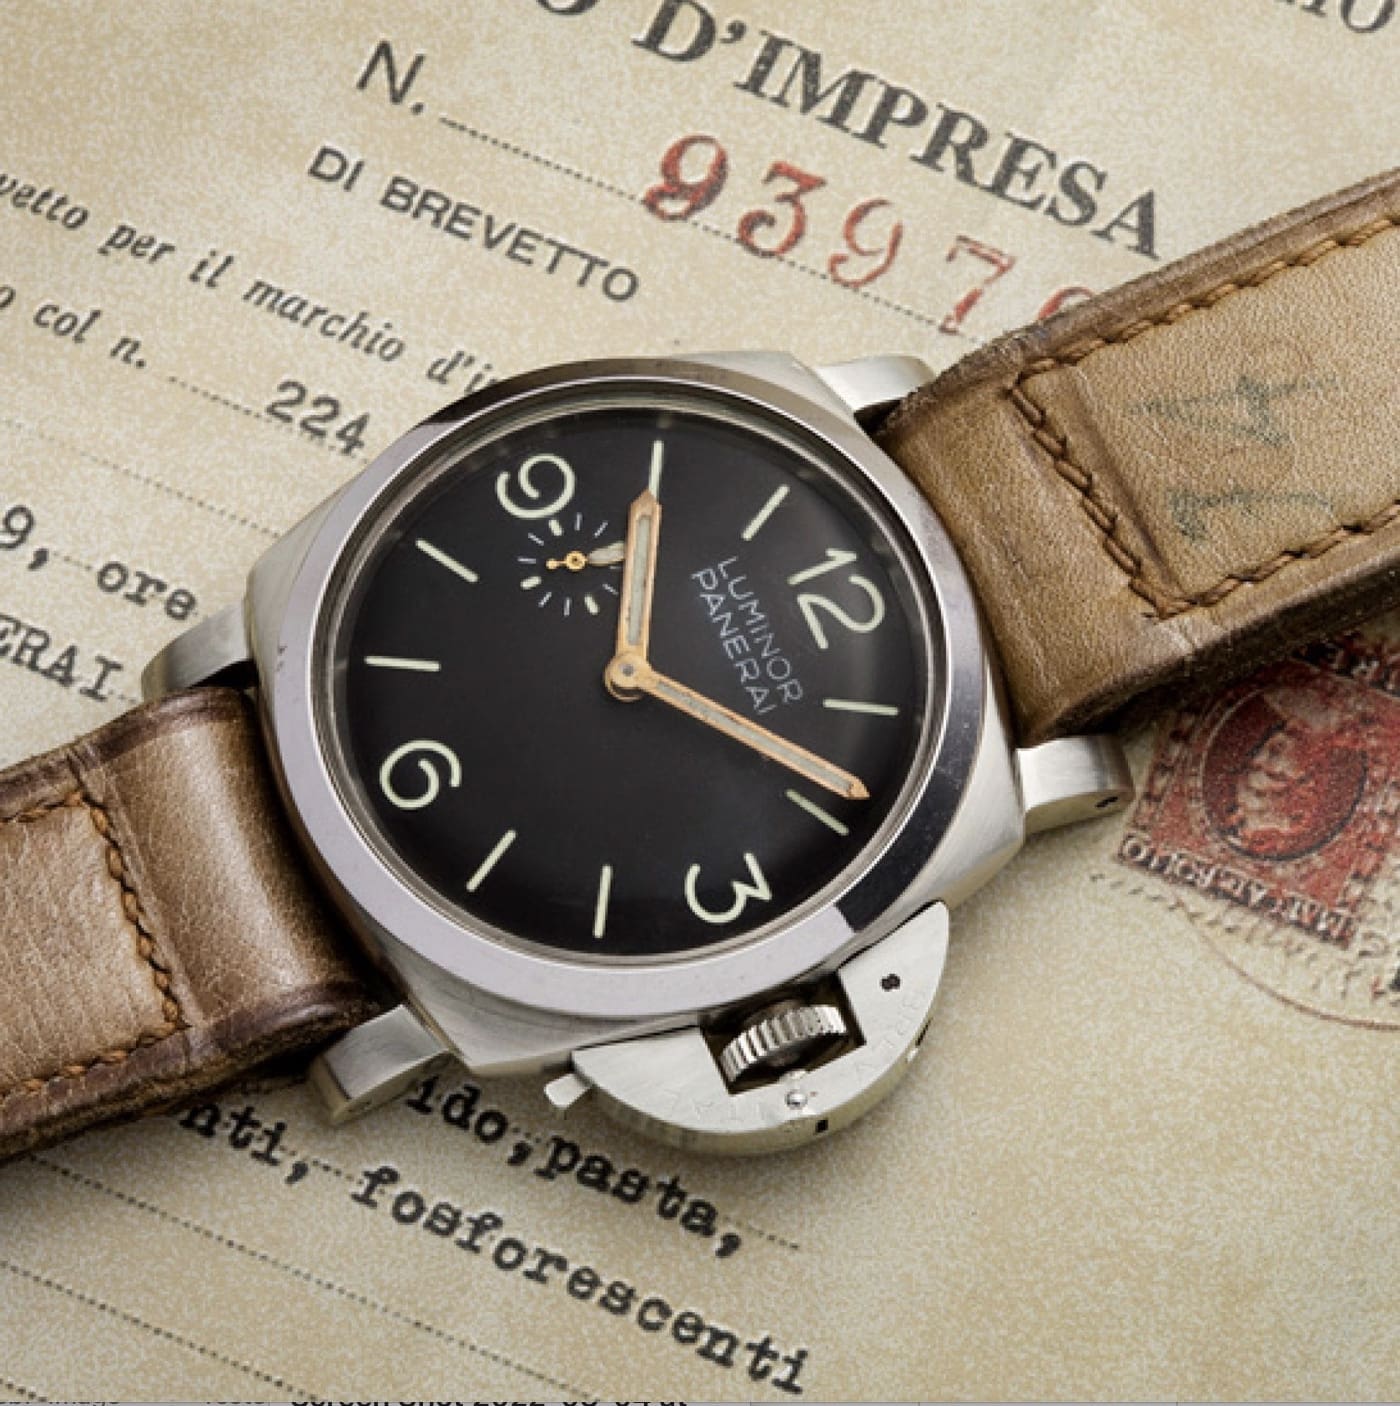 The Panerai Luminor is a tool watch with heavyweight punch